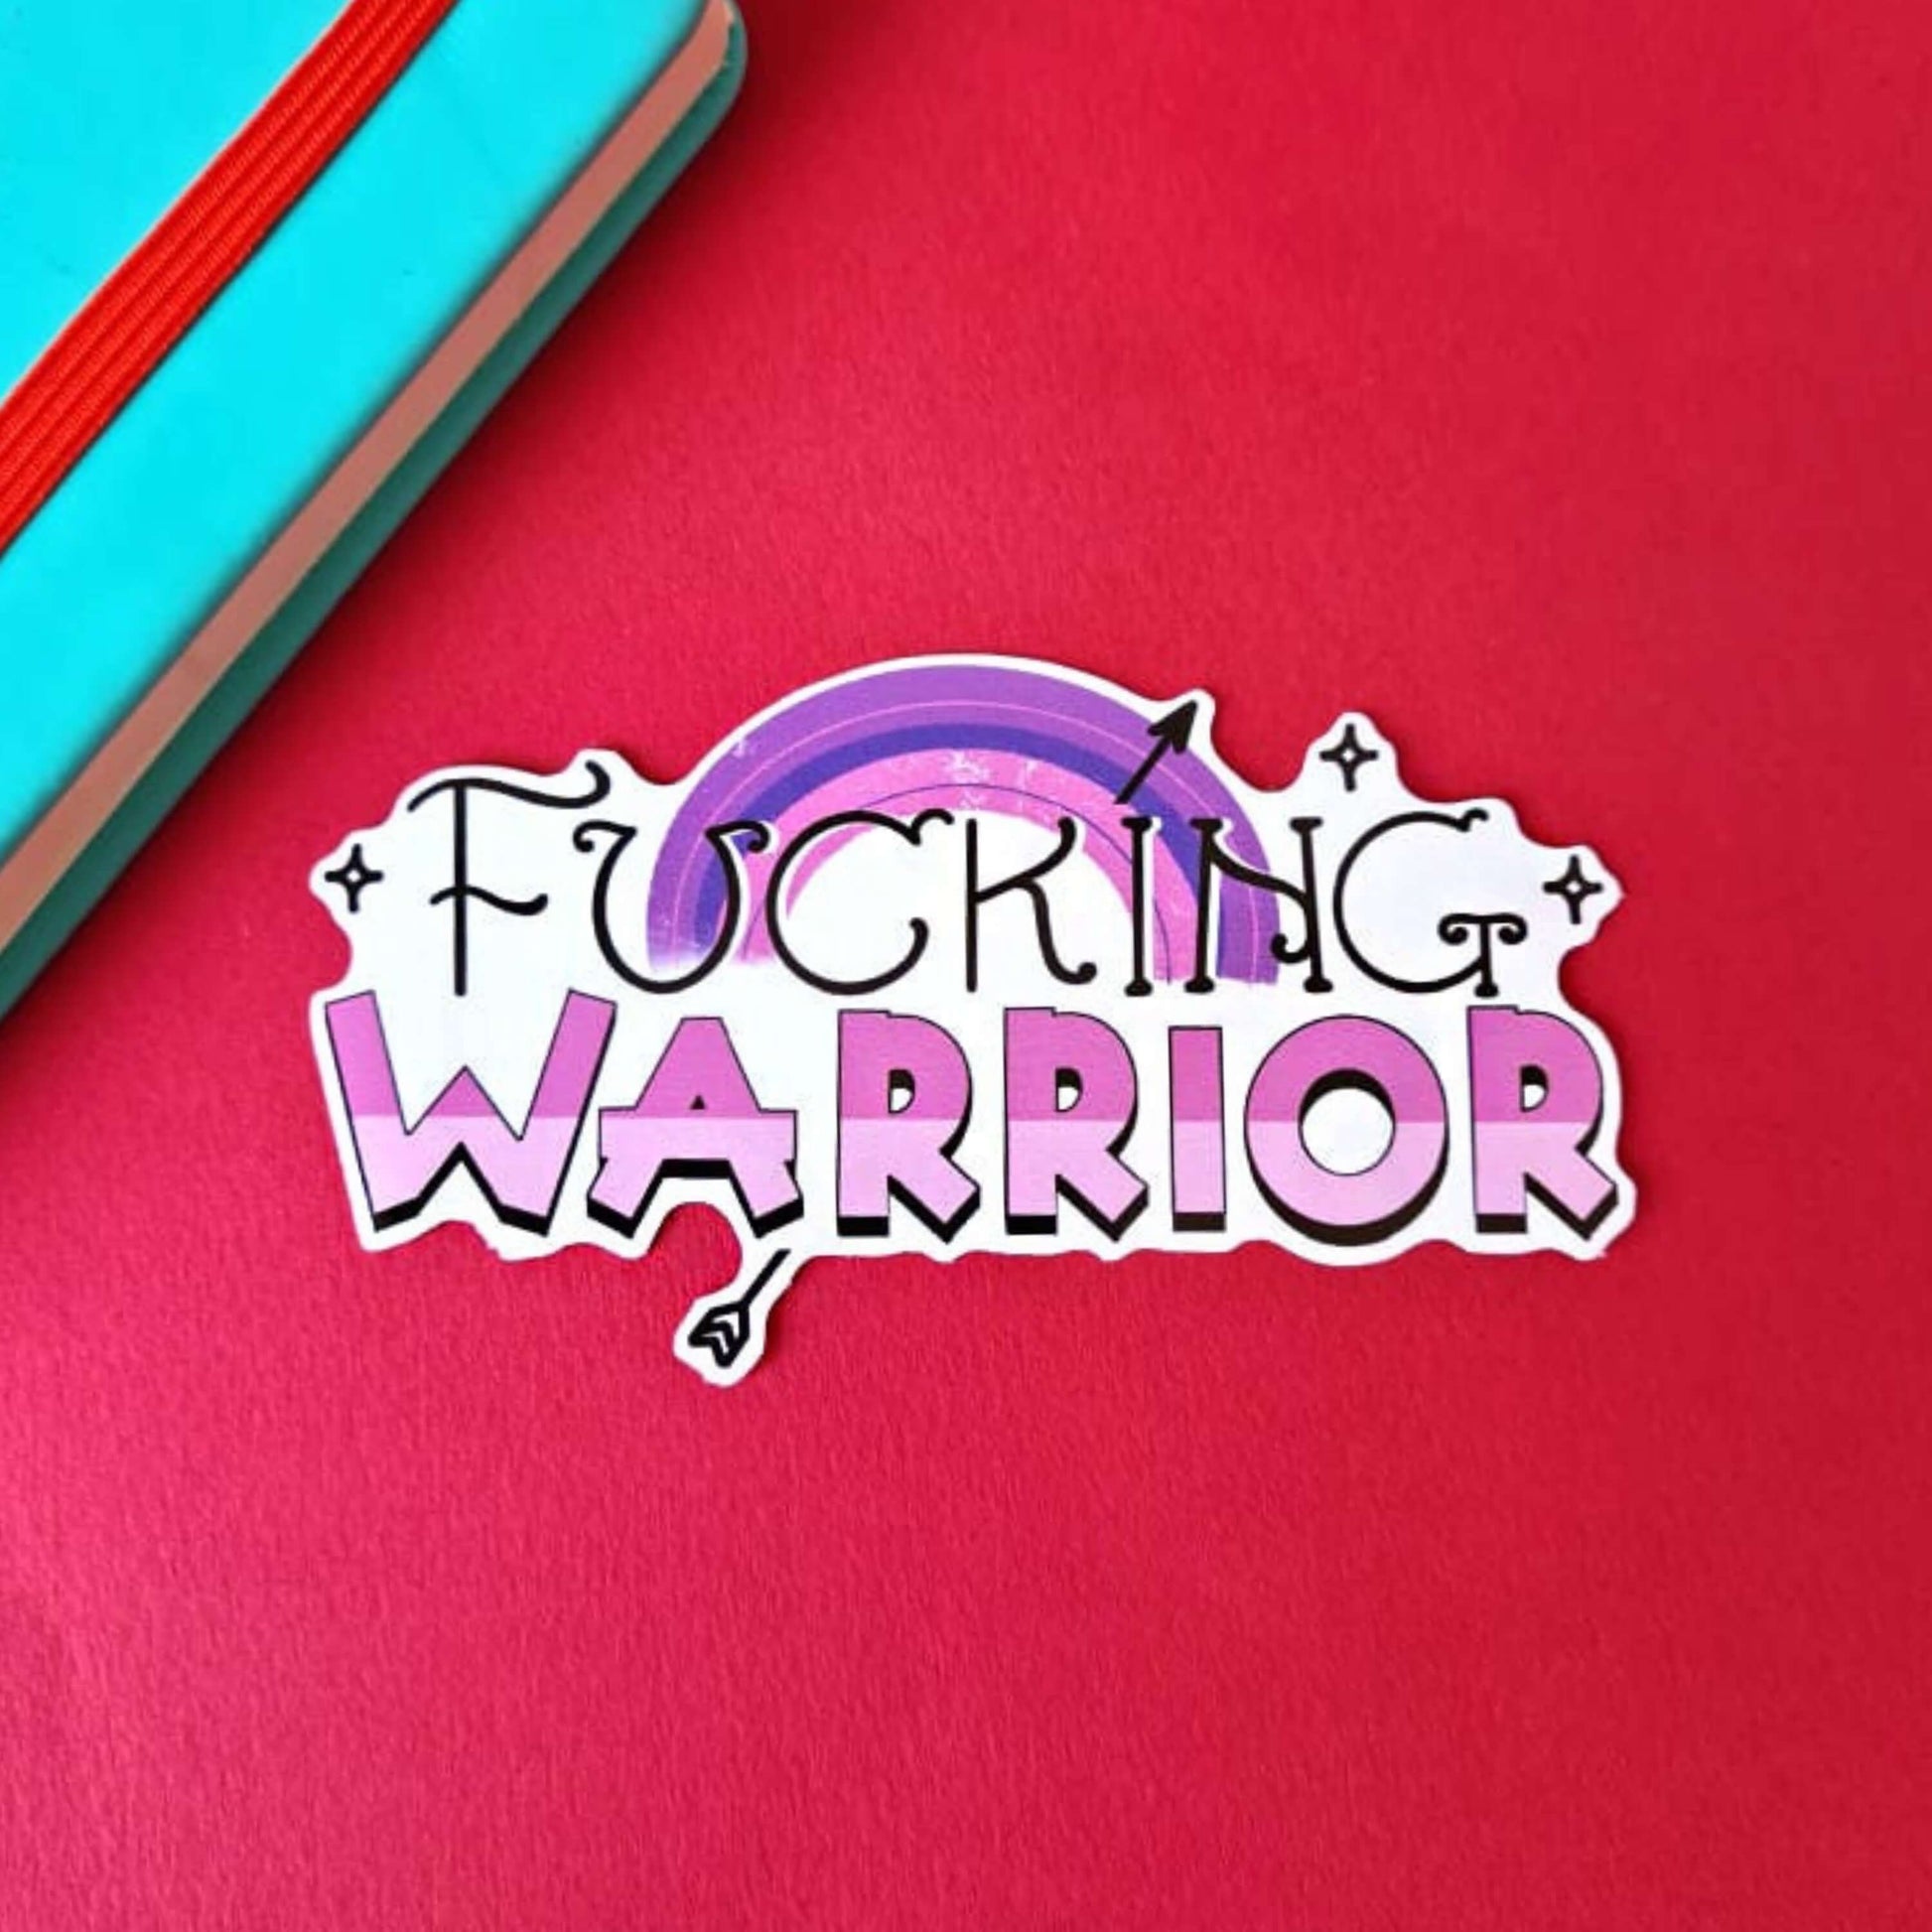 F***ing Warrior Sticker in purple on a red, blue and green background with colouring pencils and red stripe candy bag. The sticker has top swirly black text reading 'fucking' and two tone purple bold bottom text reading 'warrior', behind is a purple rainbow with a black arrow going through and black sparkles surrounding.